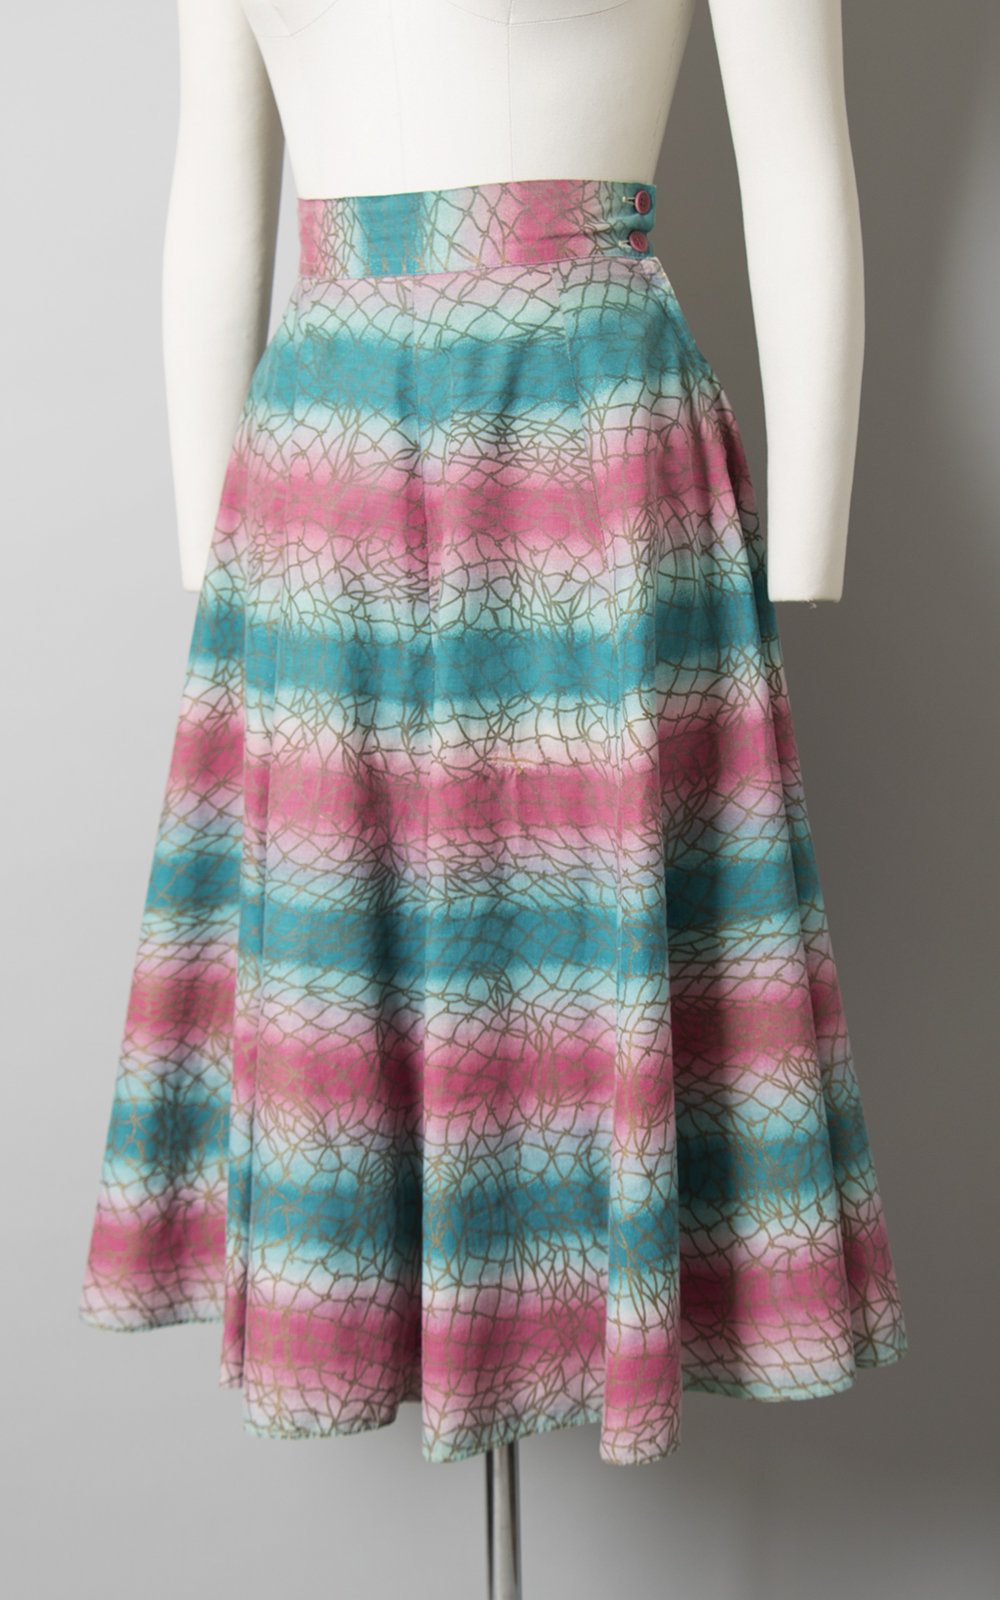 Vintage 1940s 1950s Skirt | 40s 50s Ombré Striped Cotton Pink Teal Metallic Gold Printed Full Swing Skirt (small)